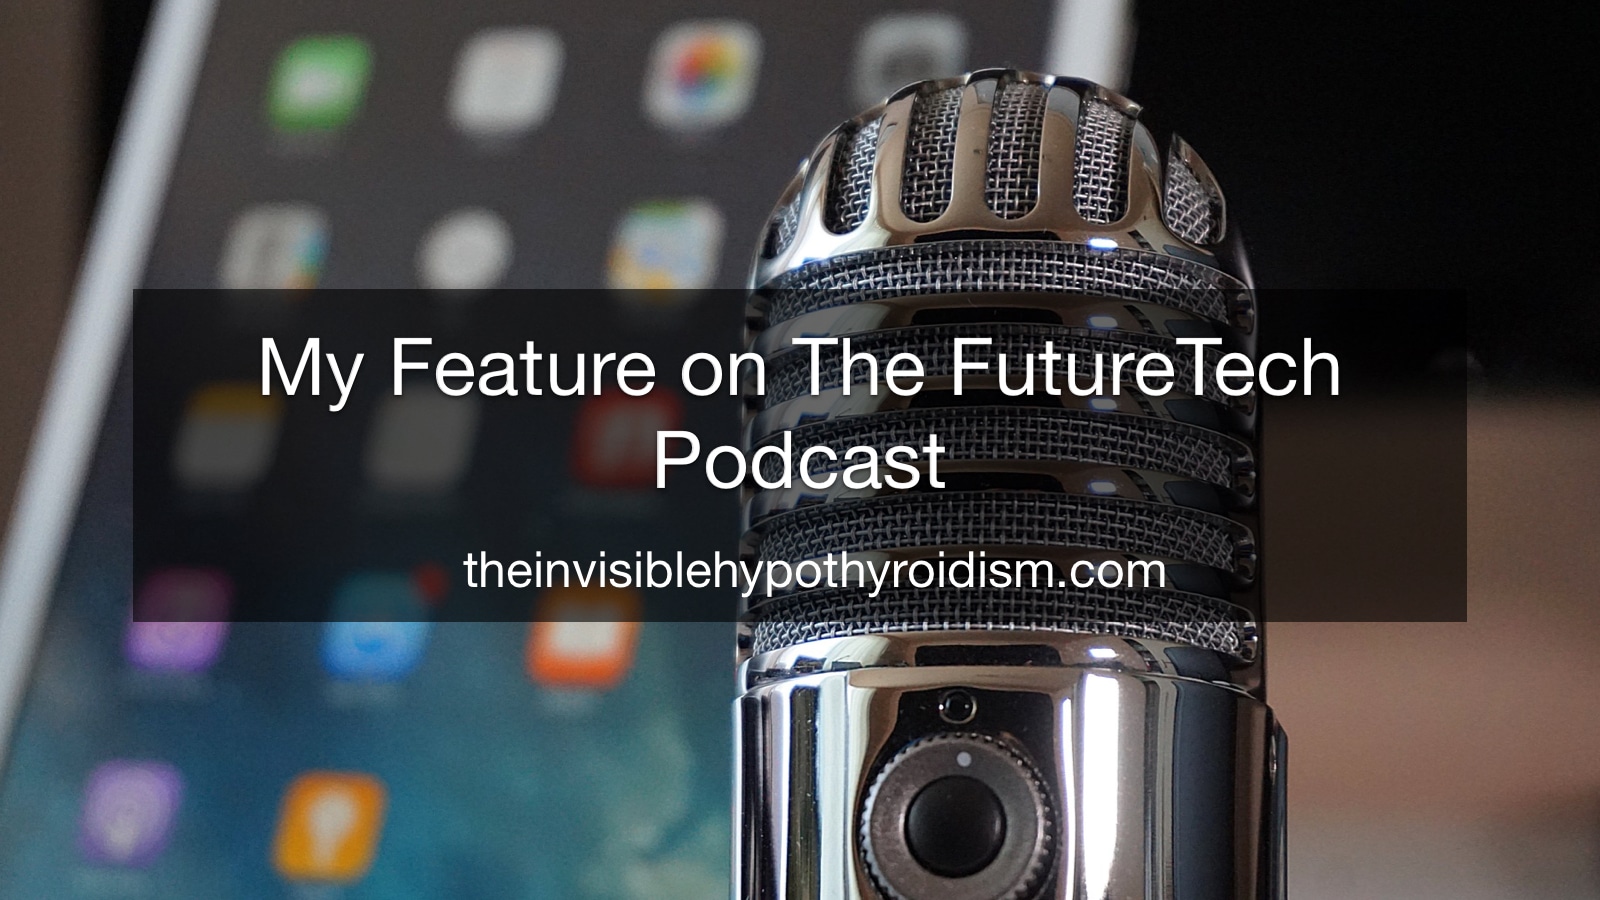 My Feature on The FutureTech Podcast